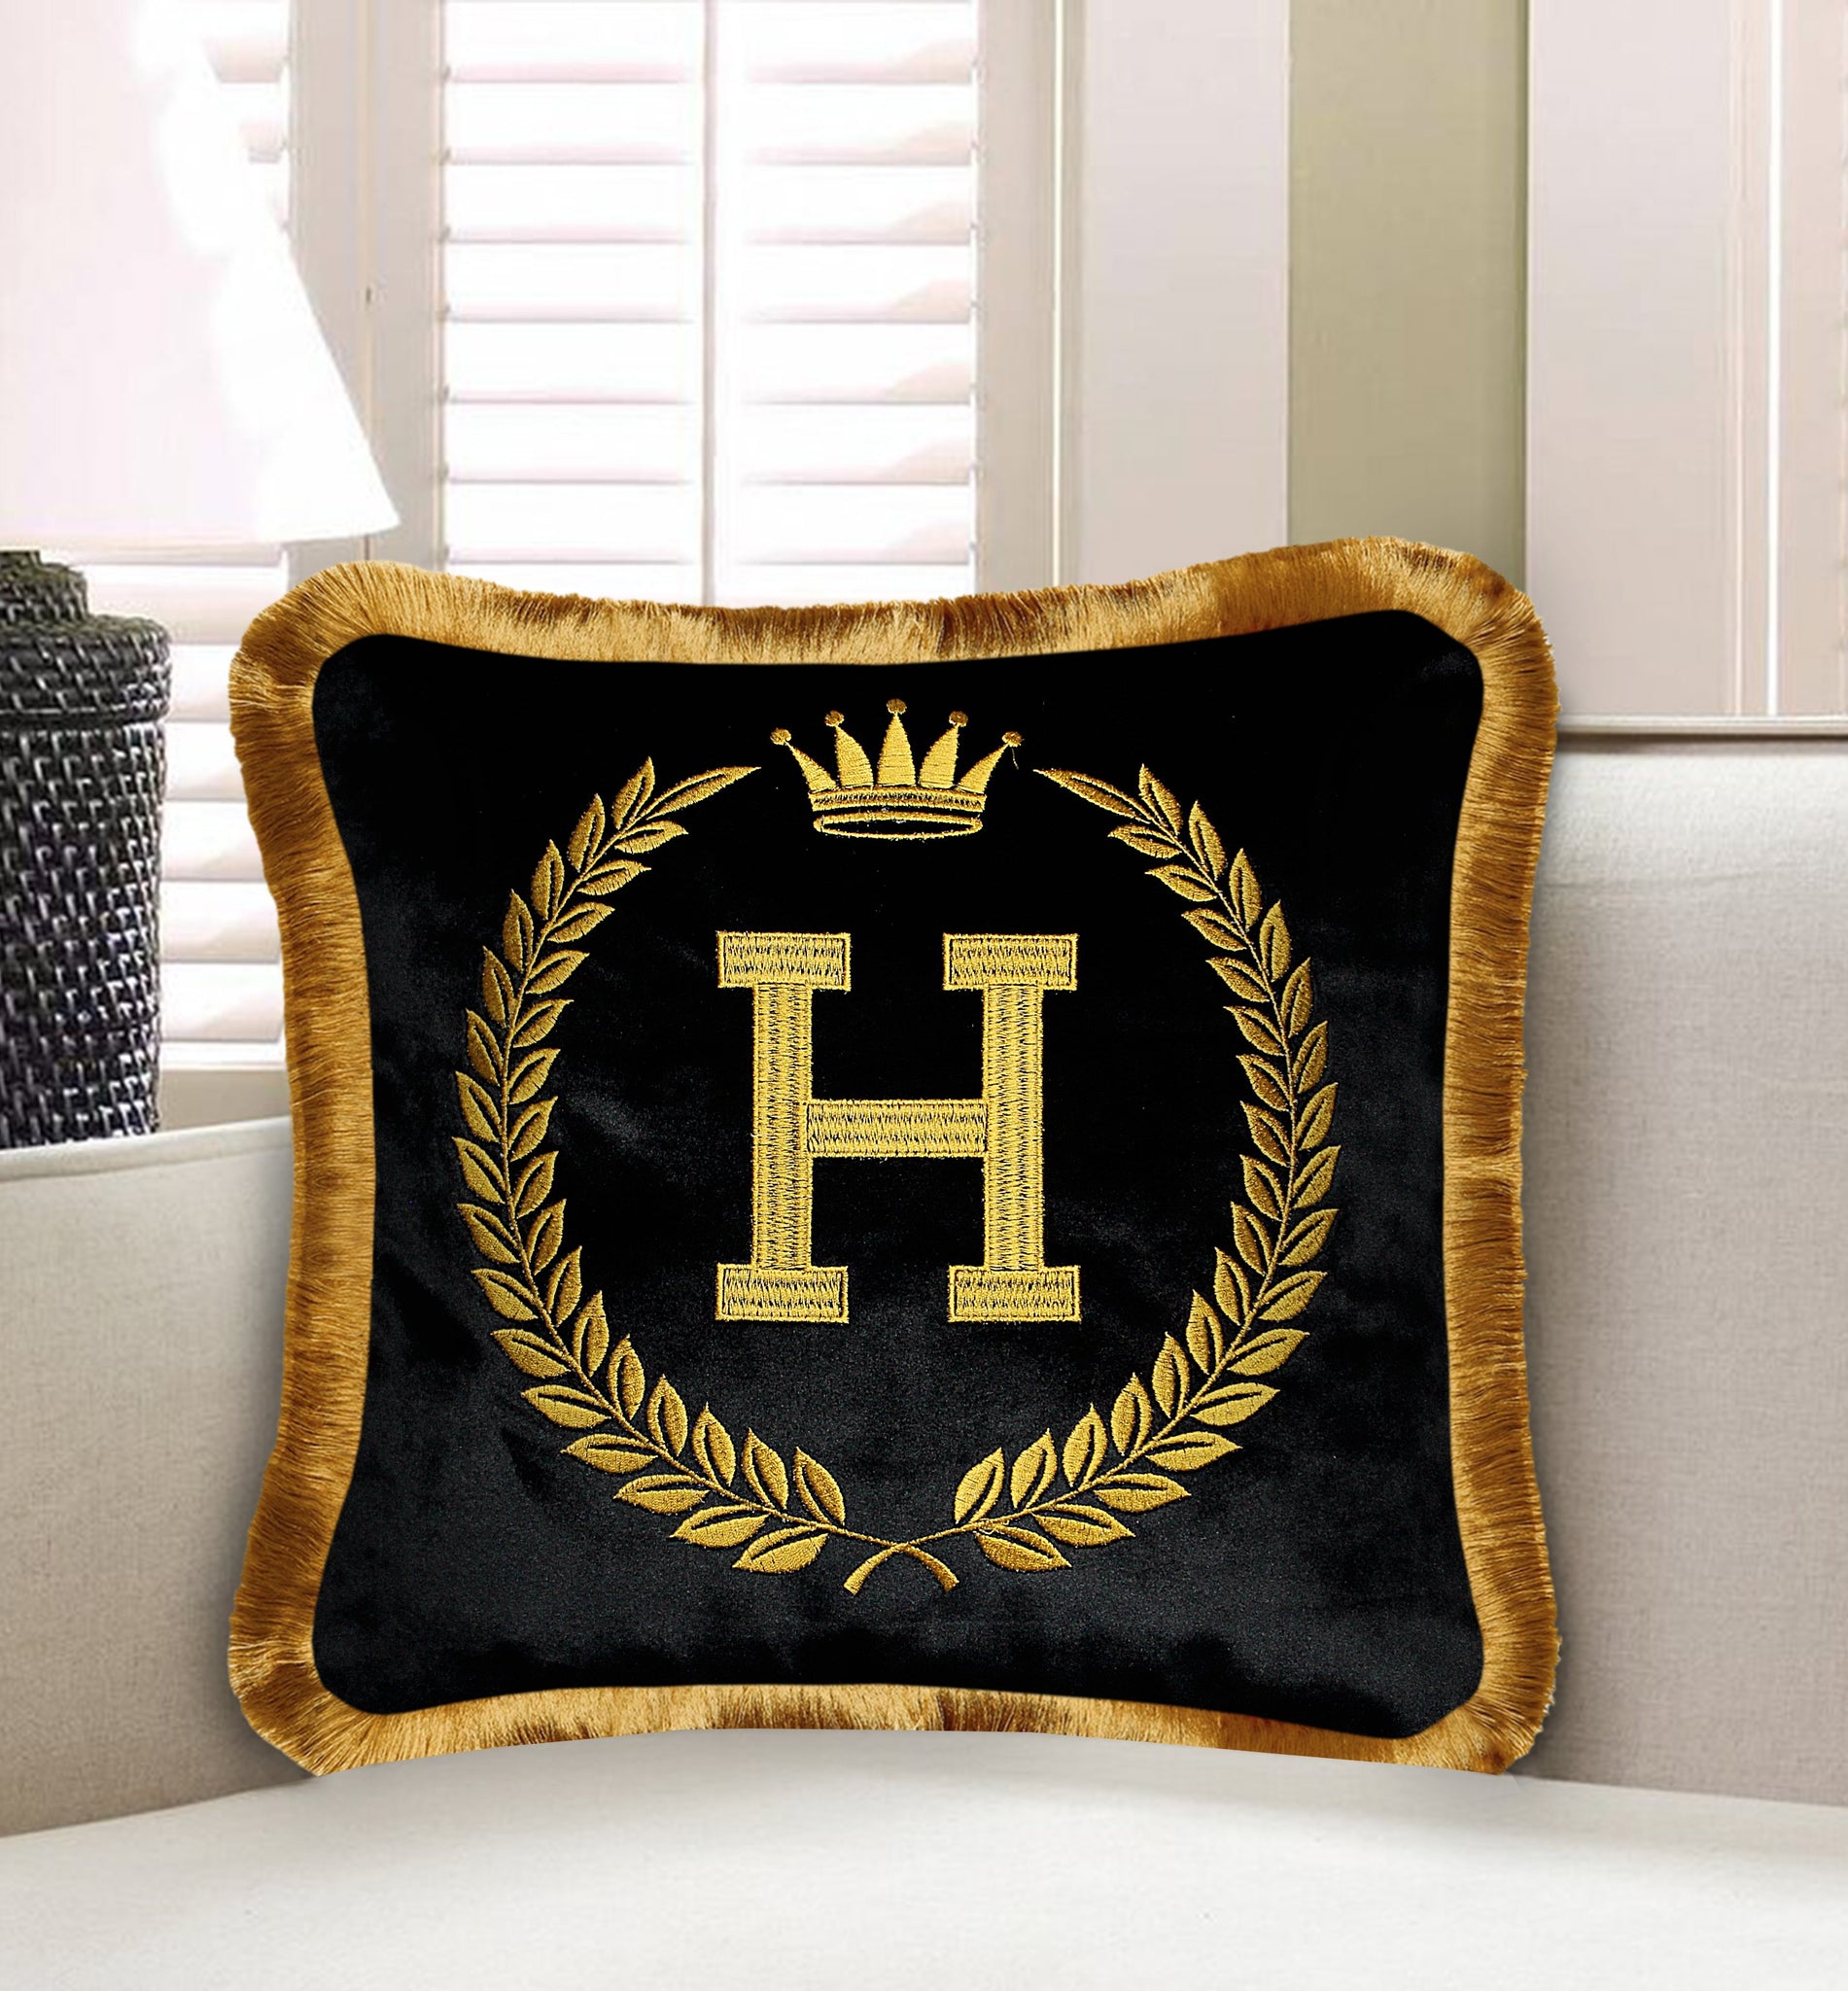  Cushion Cover Velvet Decorative Pillow Cover Classic Motif Embroidery Baroque Style Black Throw Pillow for Sofa Chair Bedroom Living Room 45x45 cm (18x18 Inches)